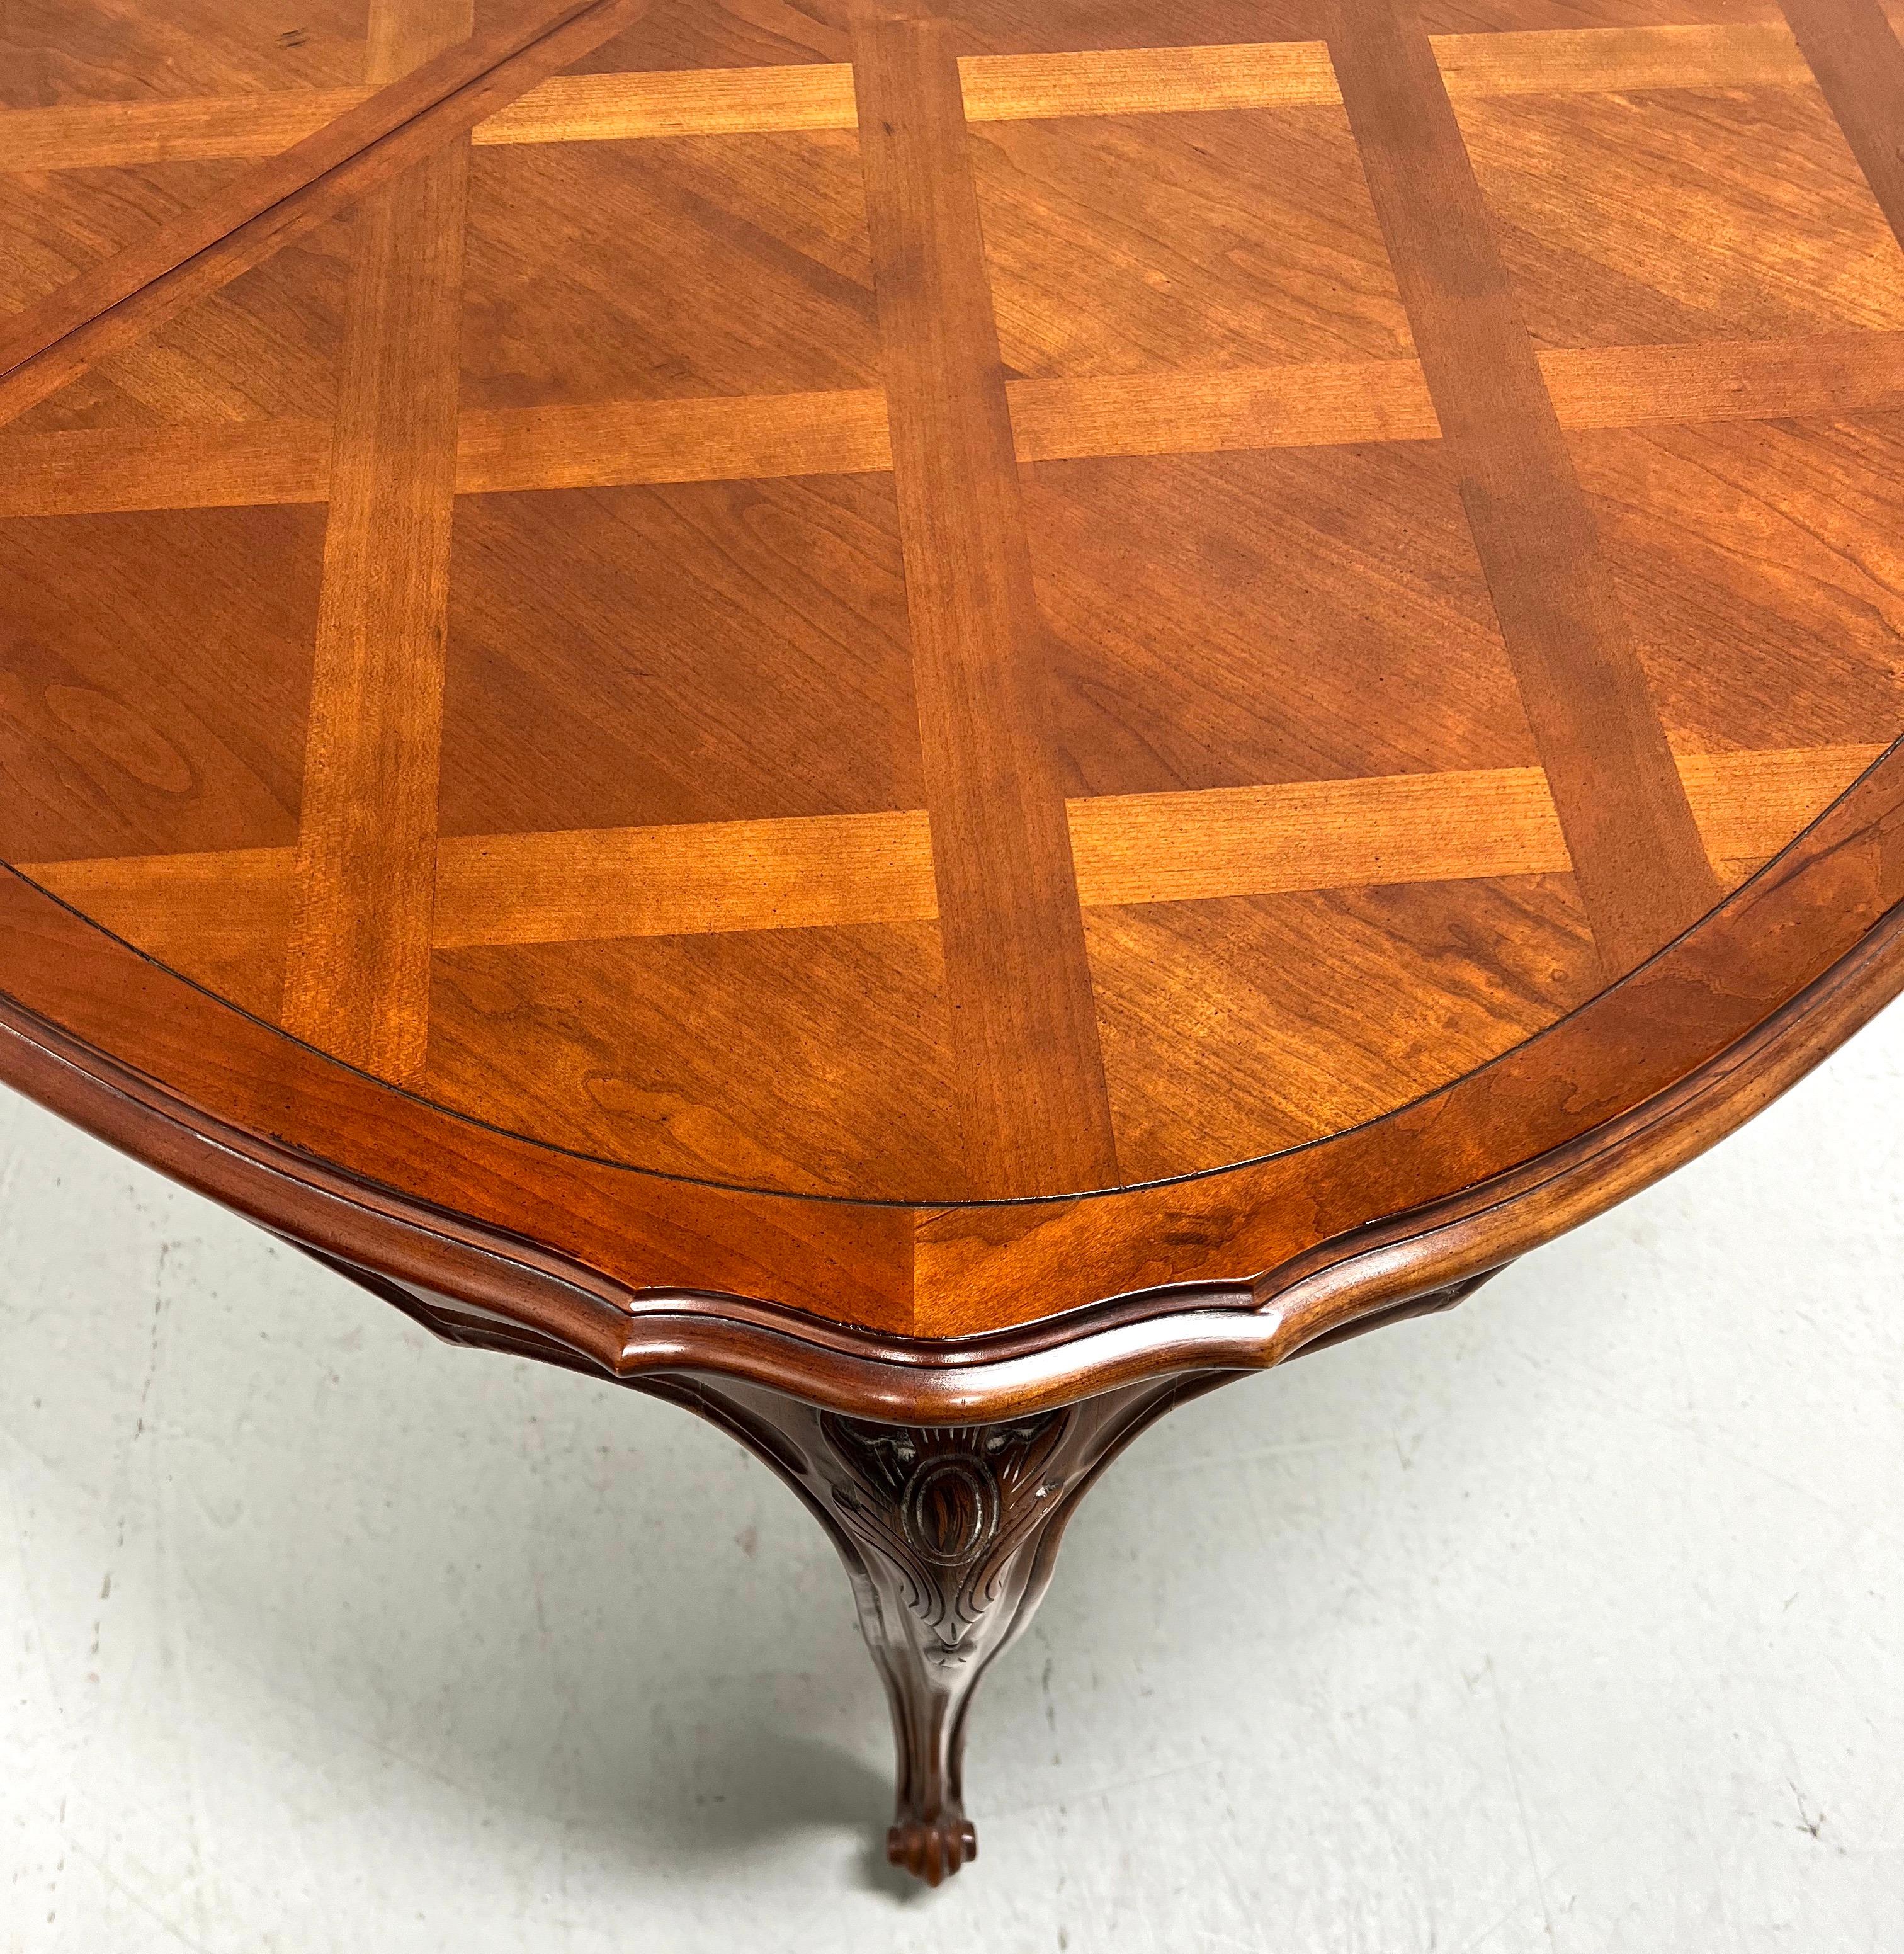 CENTURY Chardeau Collection Cherry French Provincial Oval Dining Table 2